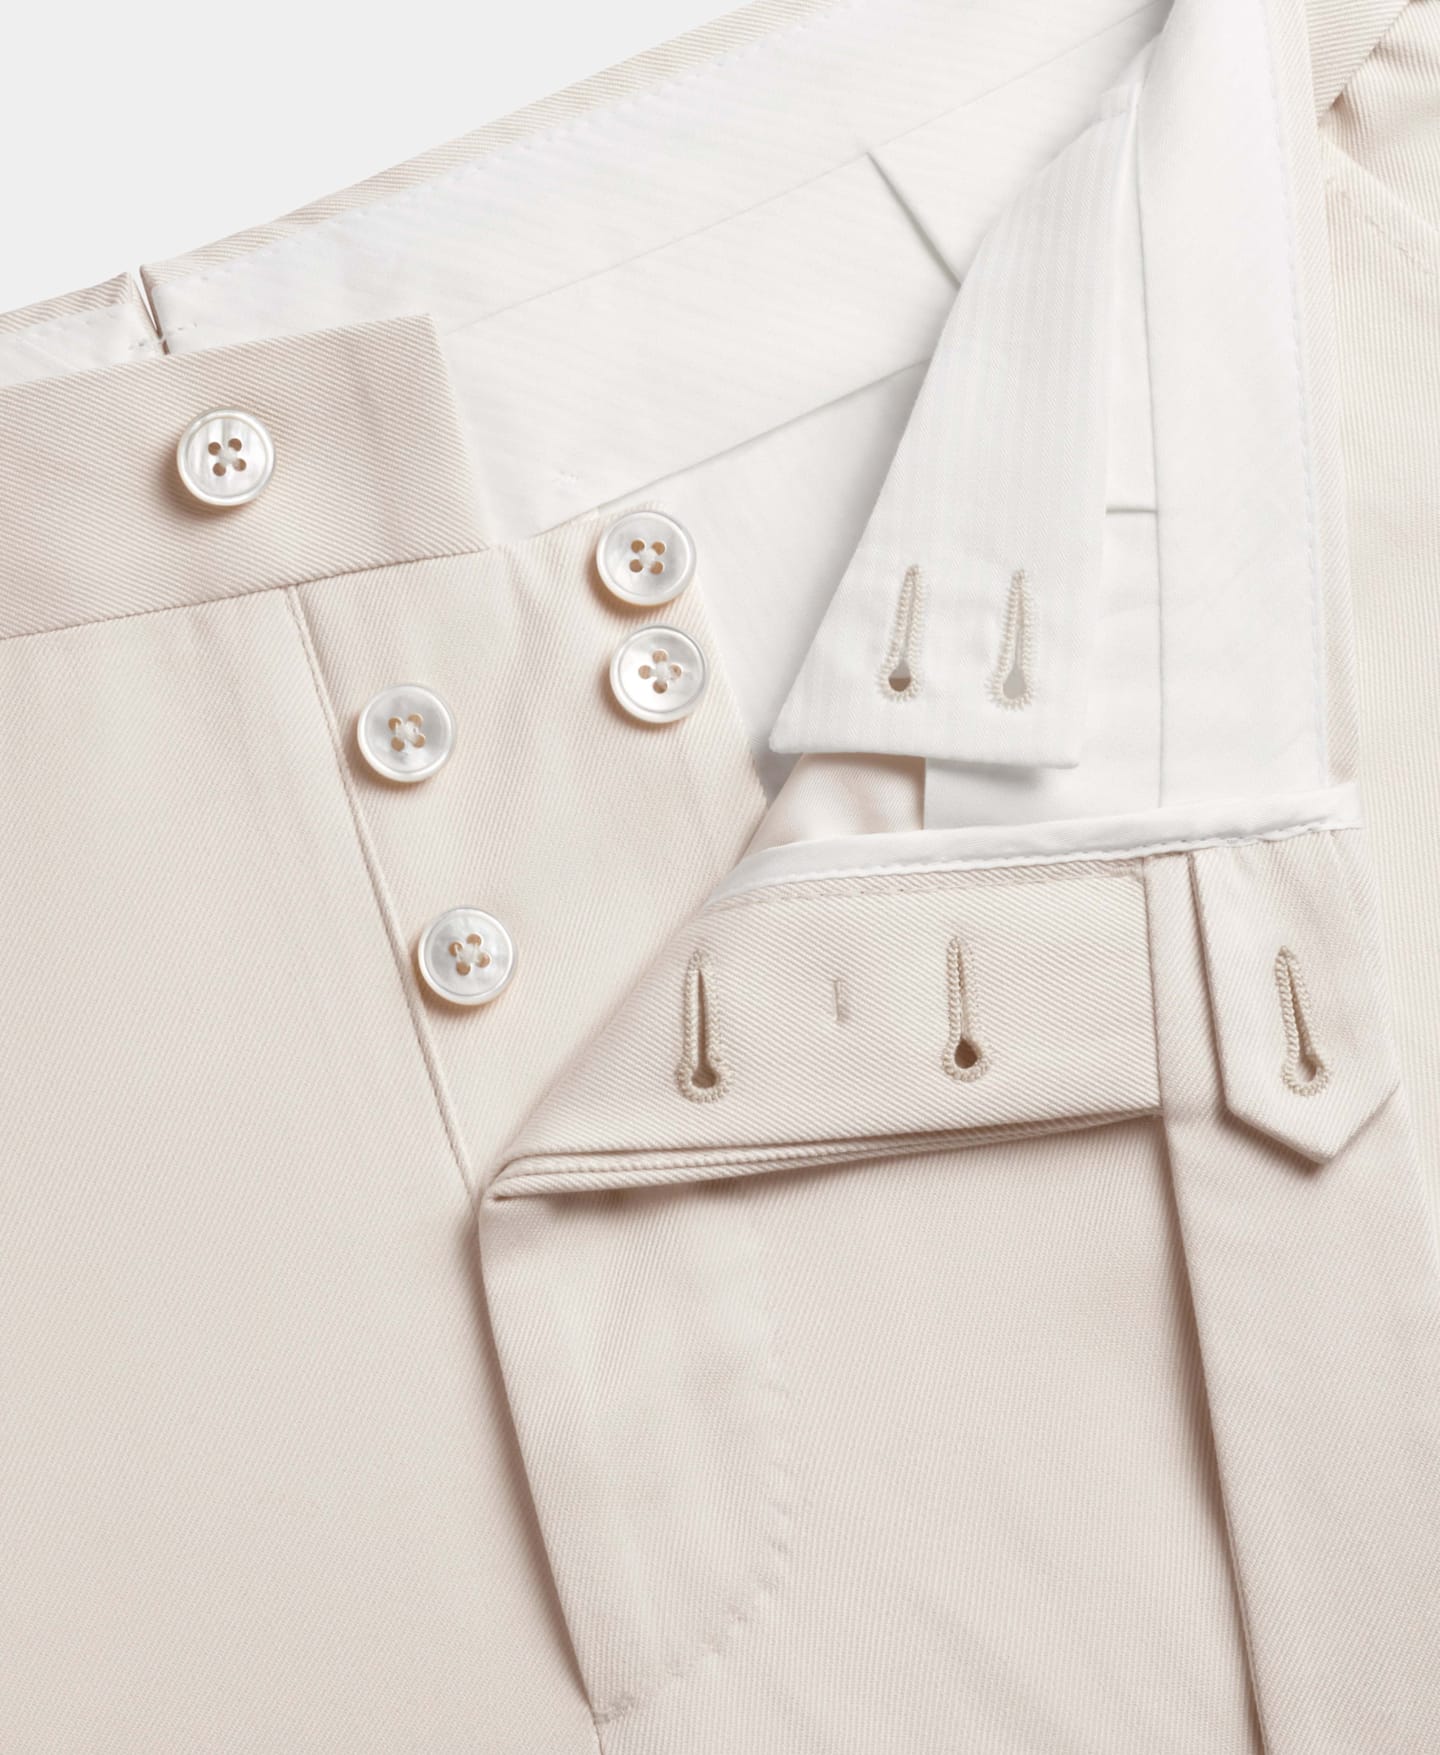 Unbuttoned light brown button fly trousers.